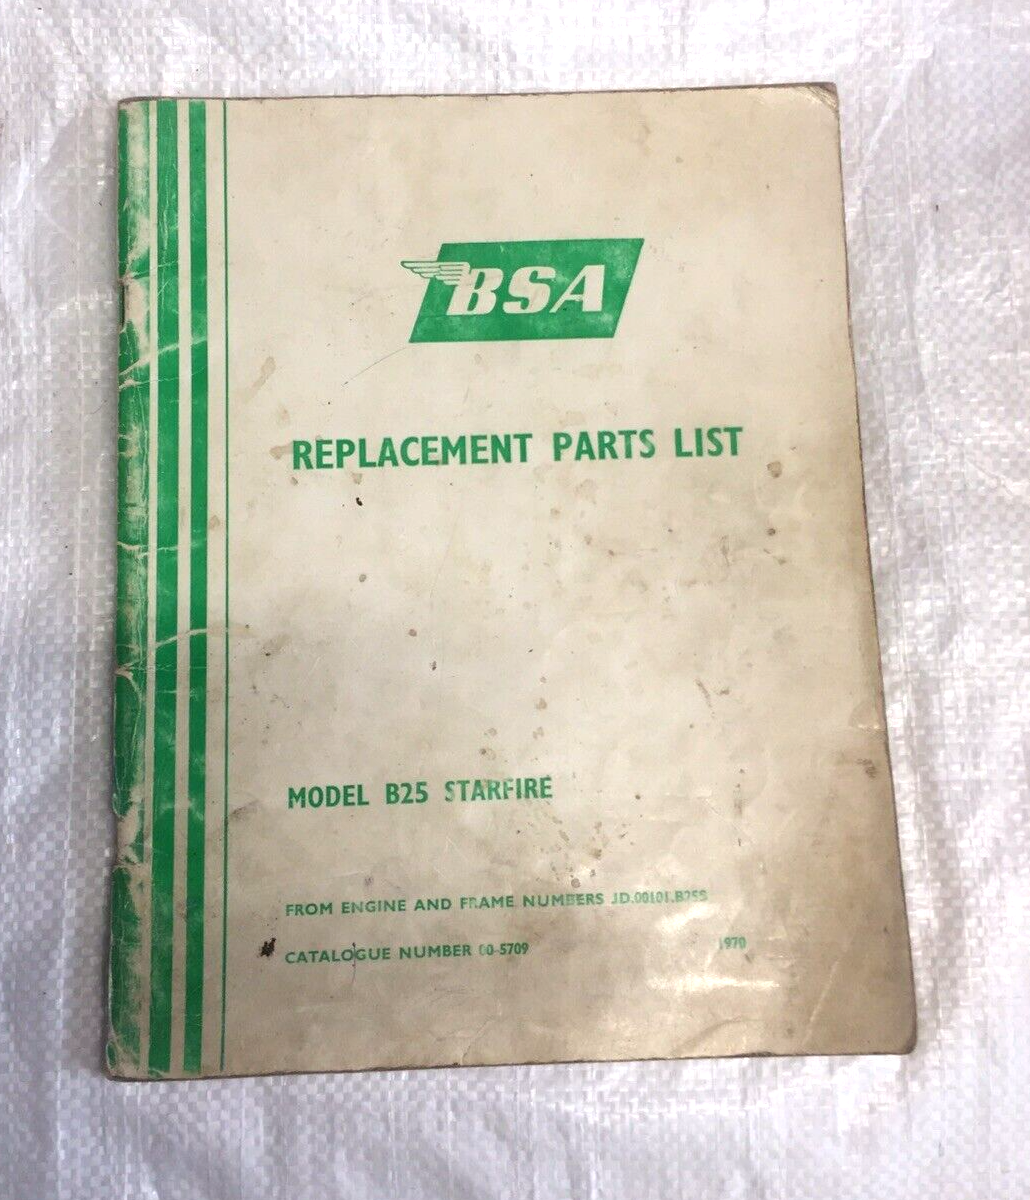 BSA STARFIRE B25 GENUINE WORKS PARTS MANUAL 1970 (WORKSHOP CLEAR OUT)